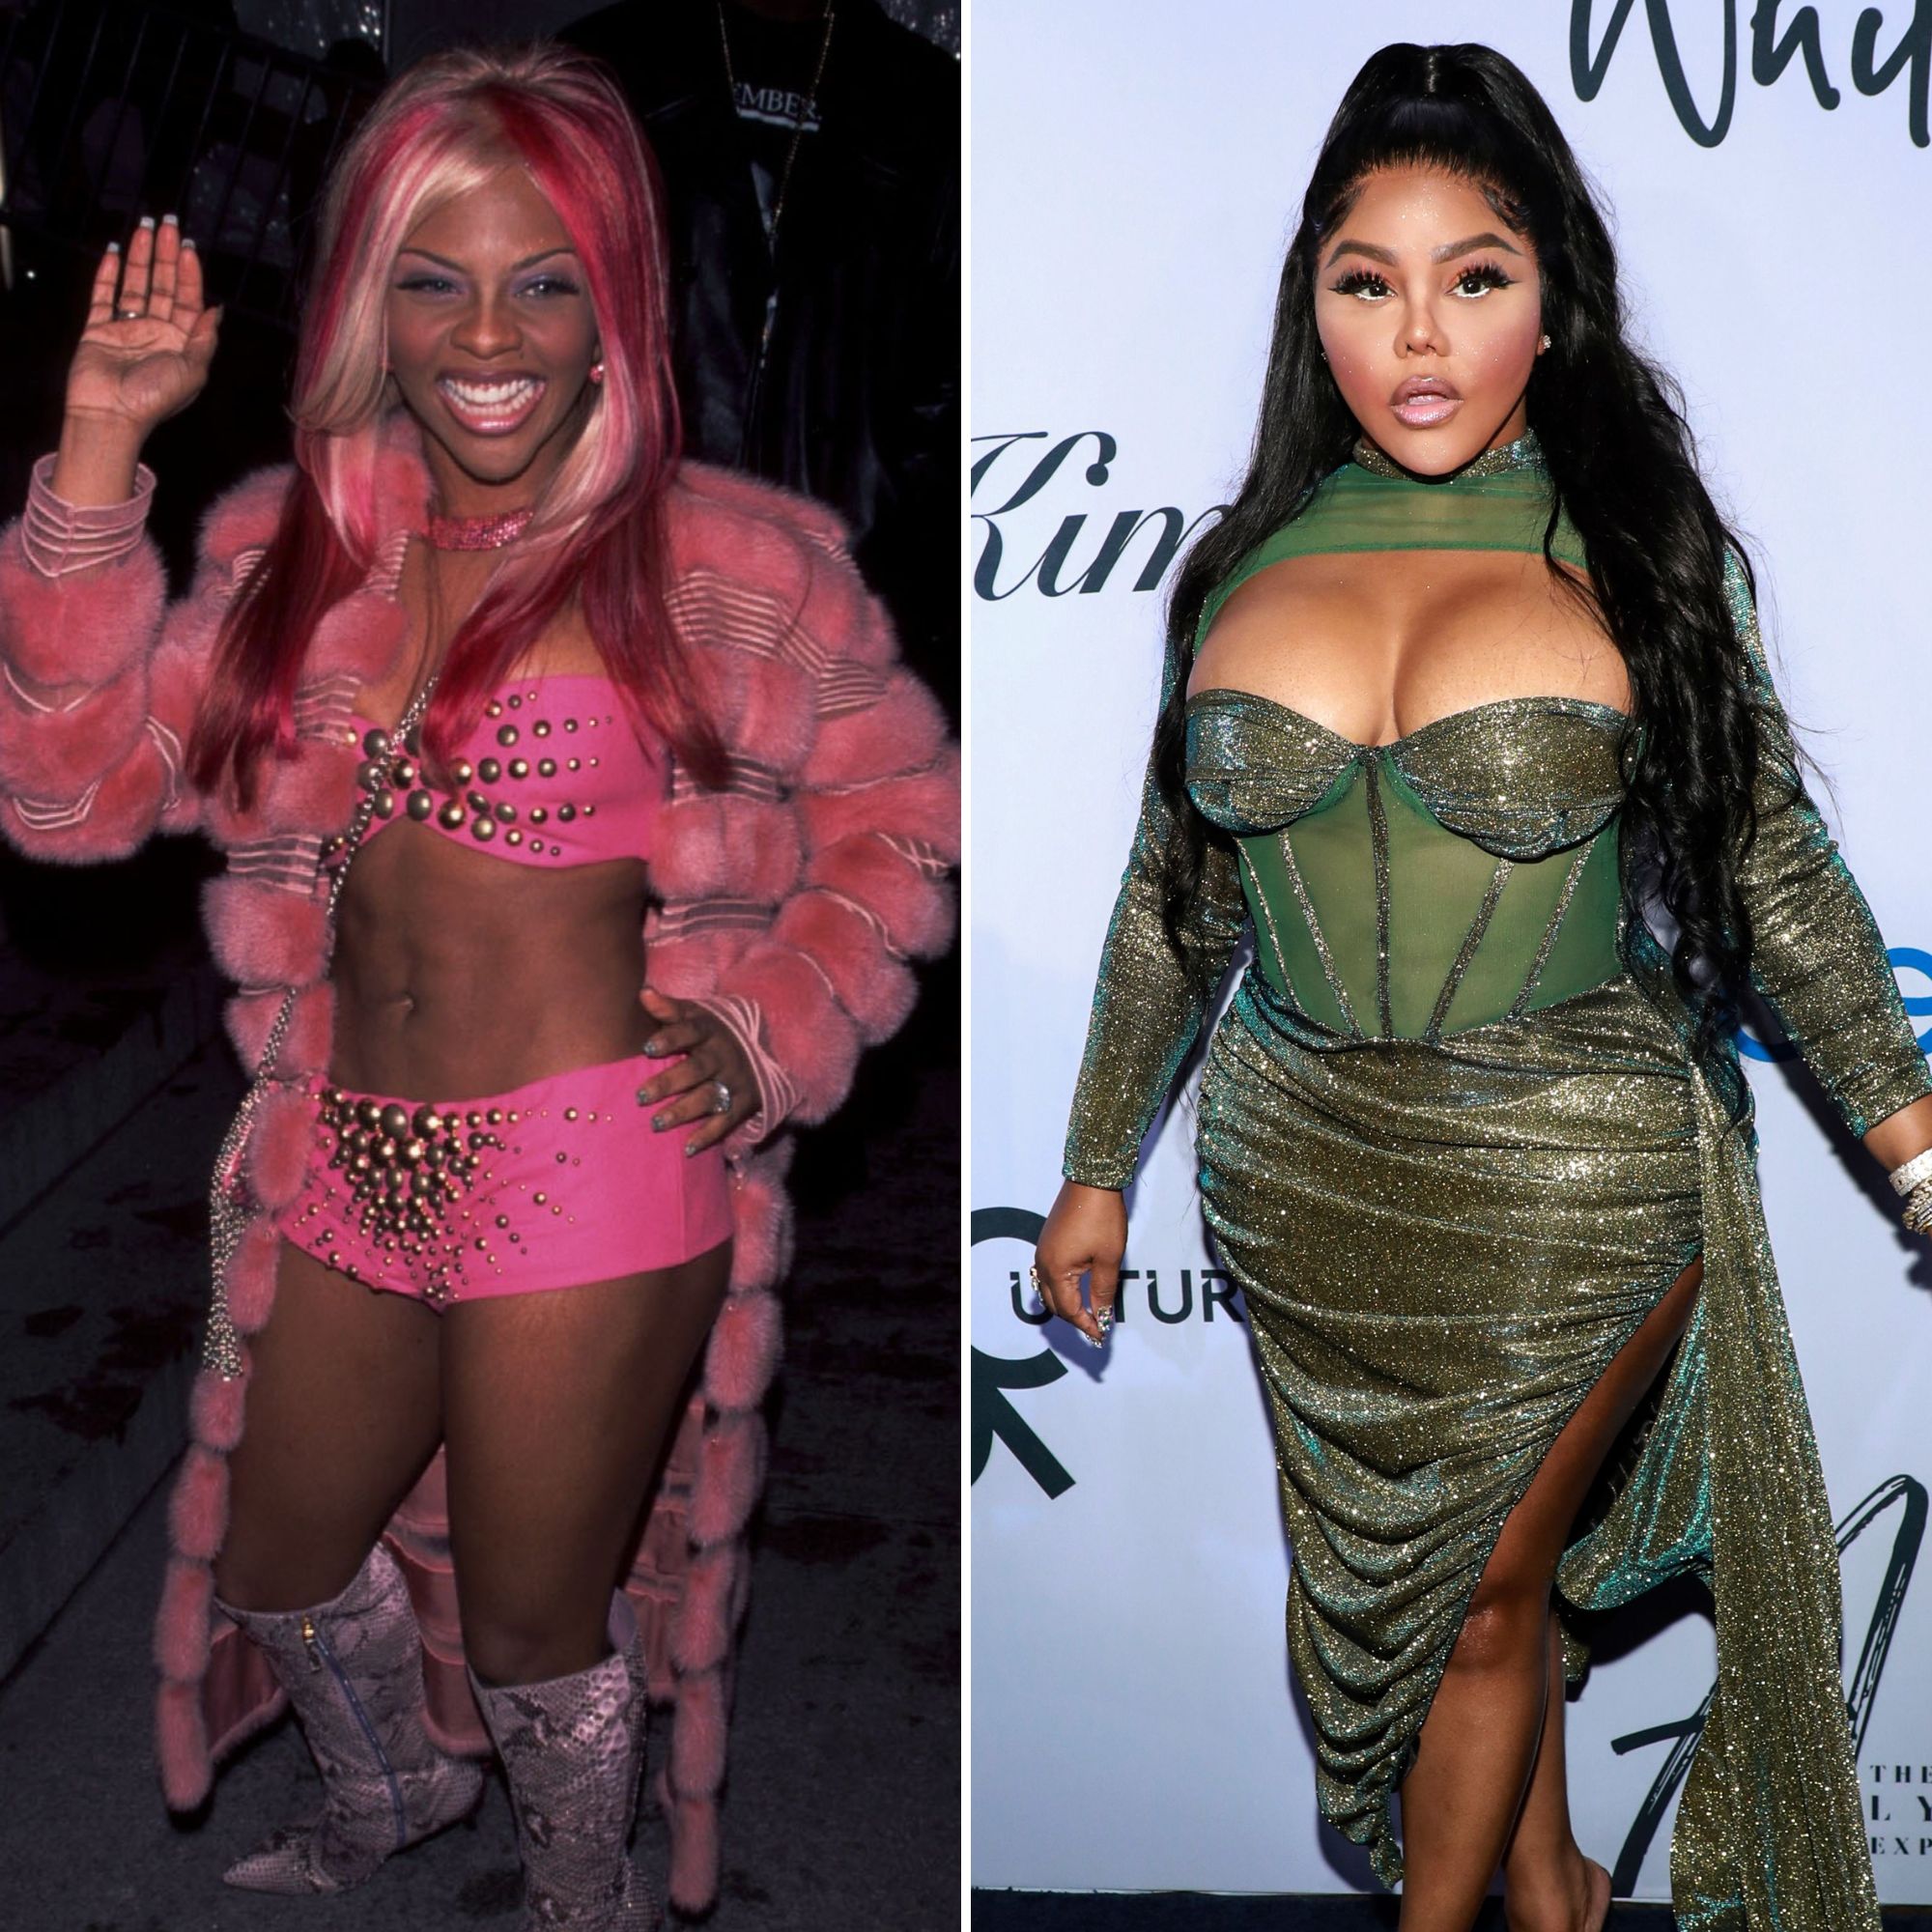 lil kim before and after skin lightening